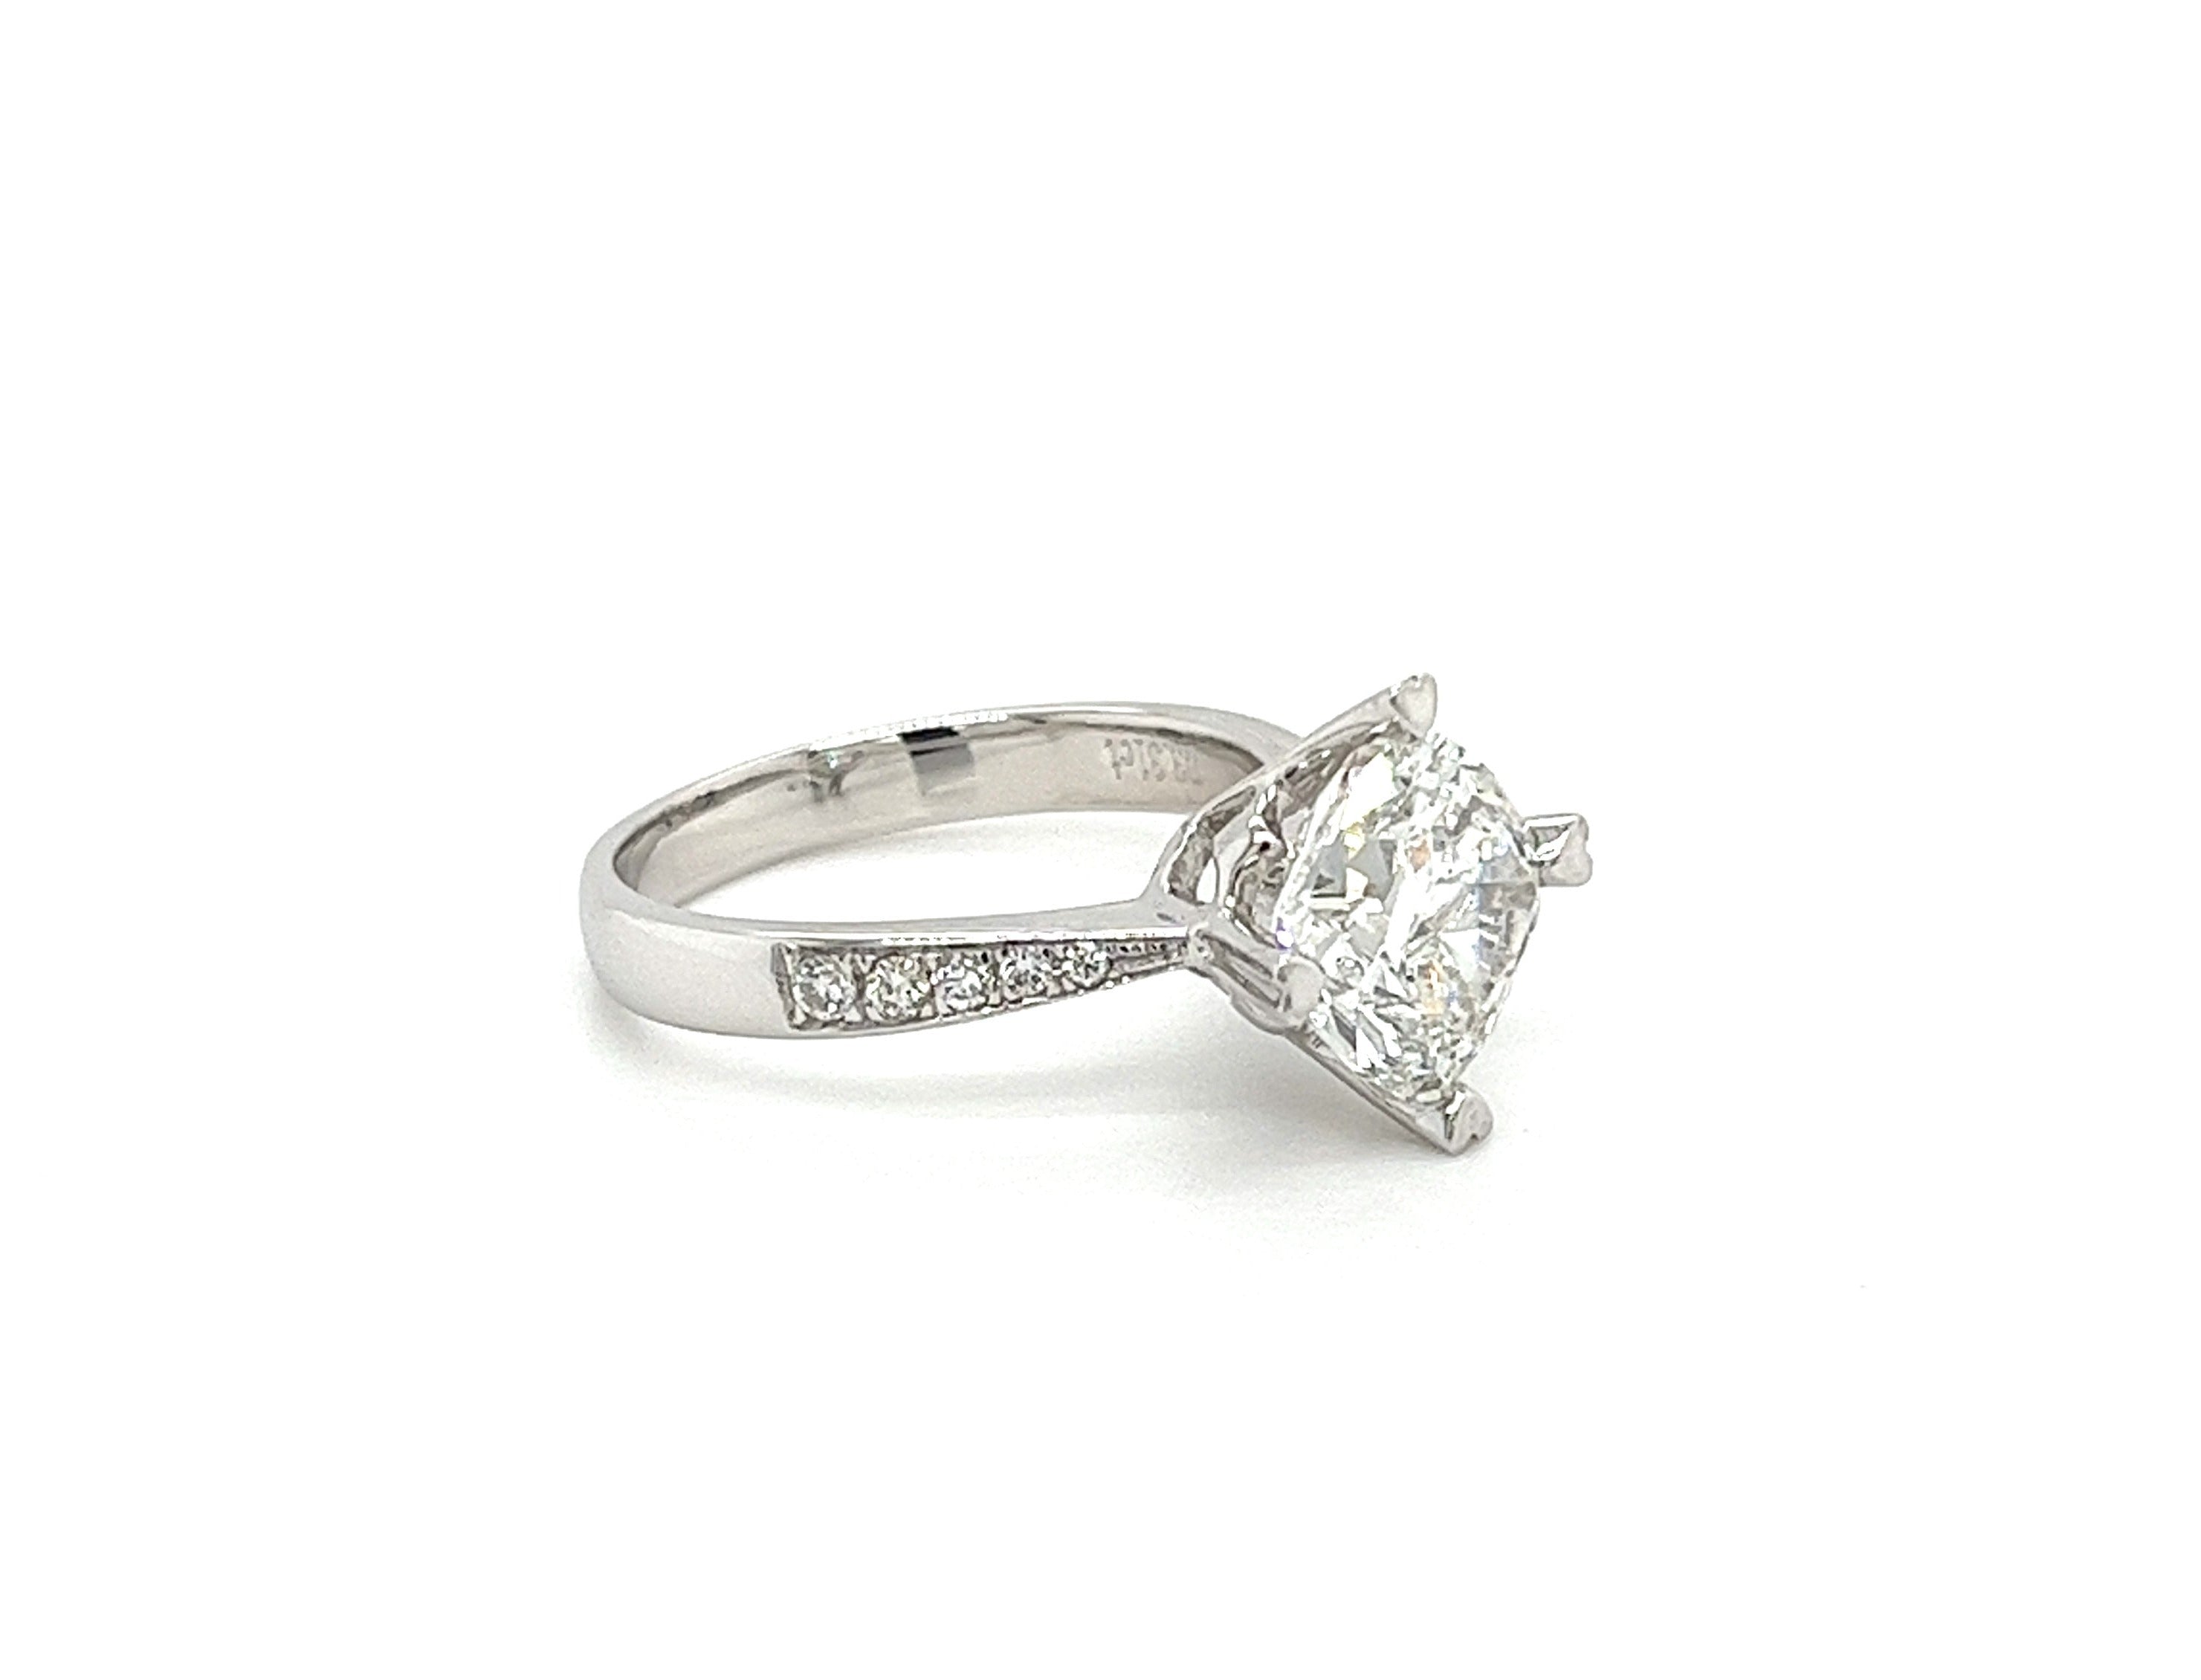 Jewellery - Rings - 14K White Gold Square Diamond Engagement Ring - Online  Shopping for Canadians